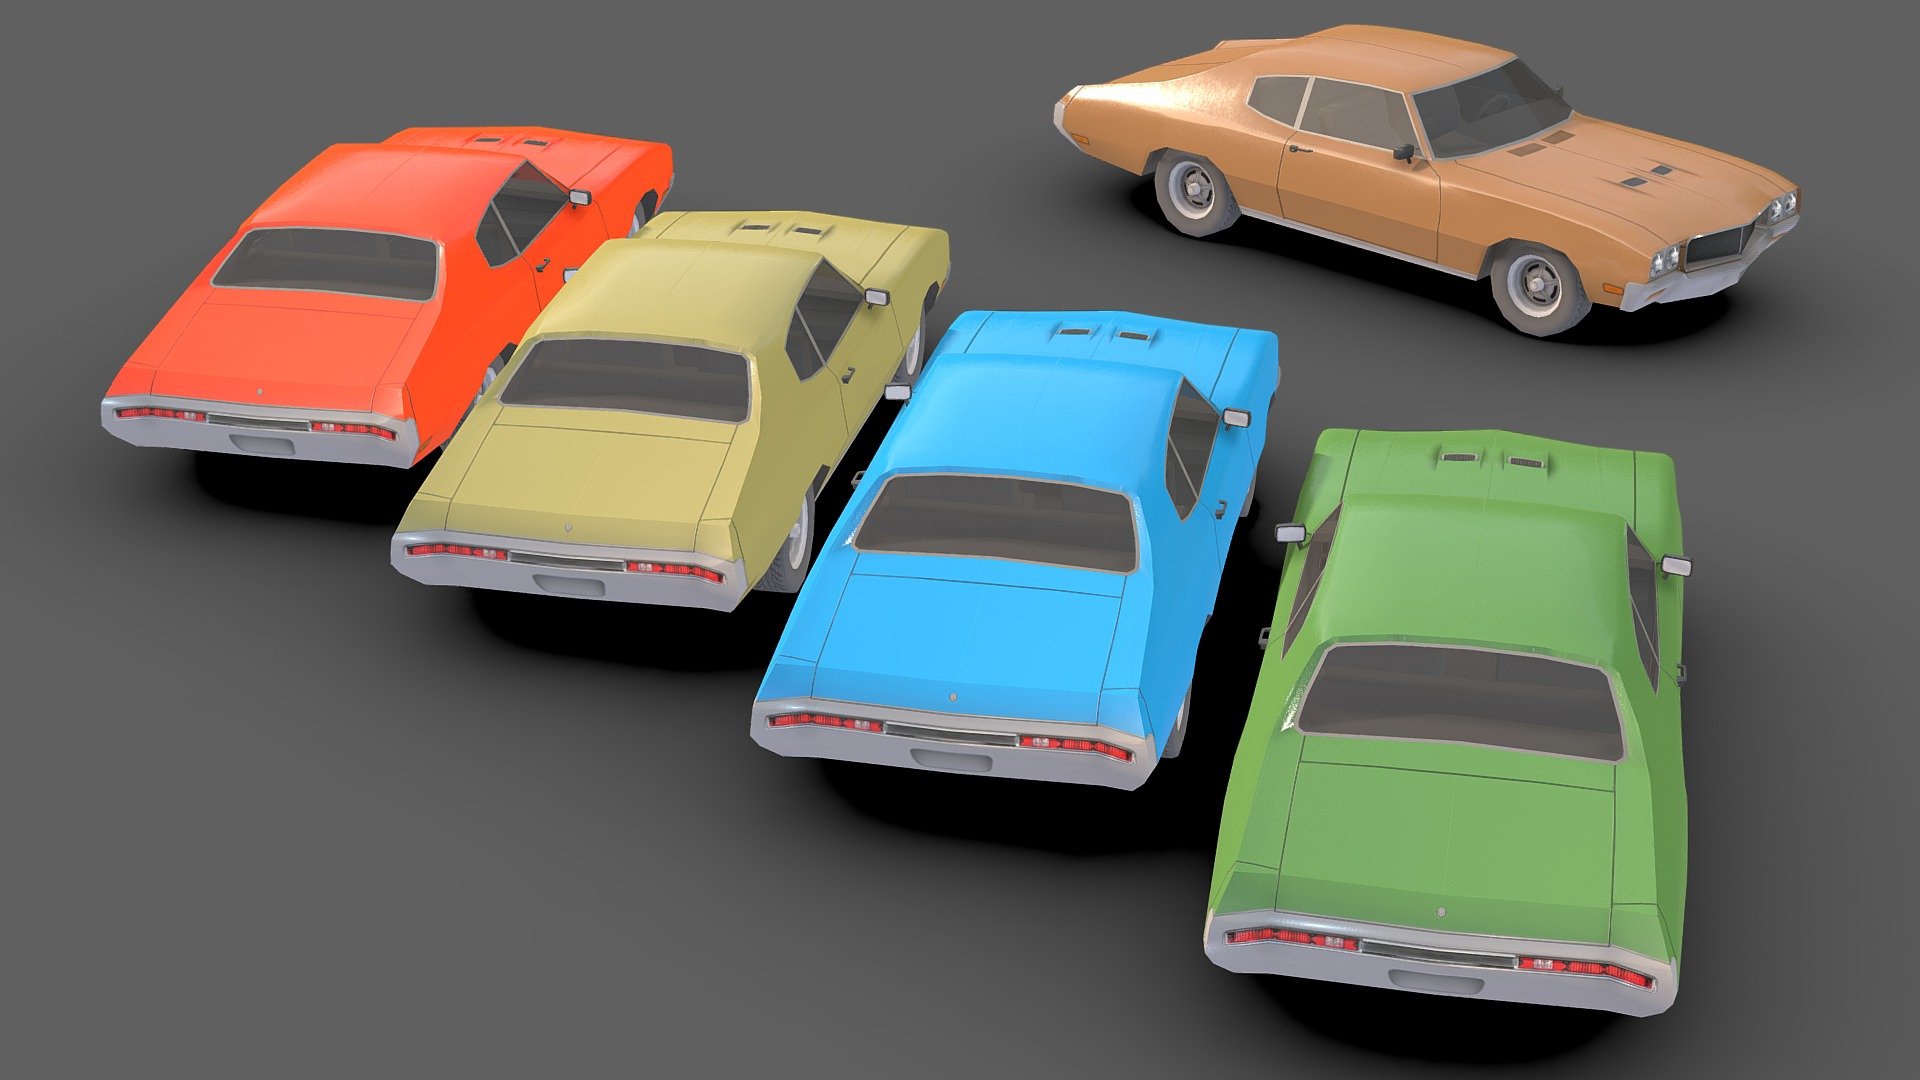 Classic Car # 5 .

You can use these models in any game and project.

This model is made with order and precision.

Separated parts (bodys . wheels . Steer ).

This car has 5 different colors.

Very Low- Poly.

The interior of this car is very low poly.

Average poly count: 4,000 tris.

Texture size: 2048 / 1024 / 512 (PNG).

It has a UV map texture.

Number of textures: 3.

Number of materials: 4.

Format: Fbx / Obj / 3DMax .

The original files are in the Additional file .

Wait for my new models.. Your friend (Sidra) 3d model